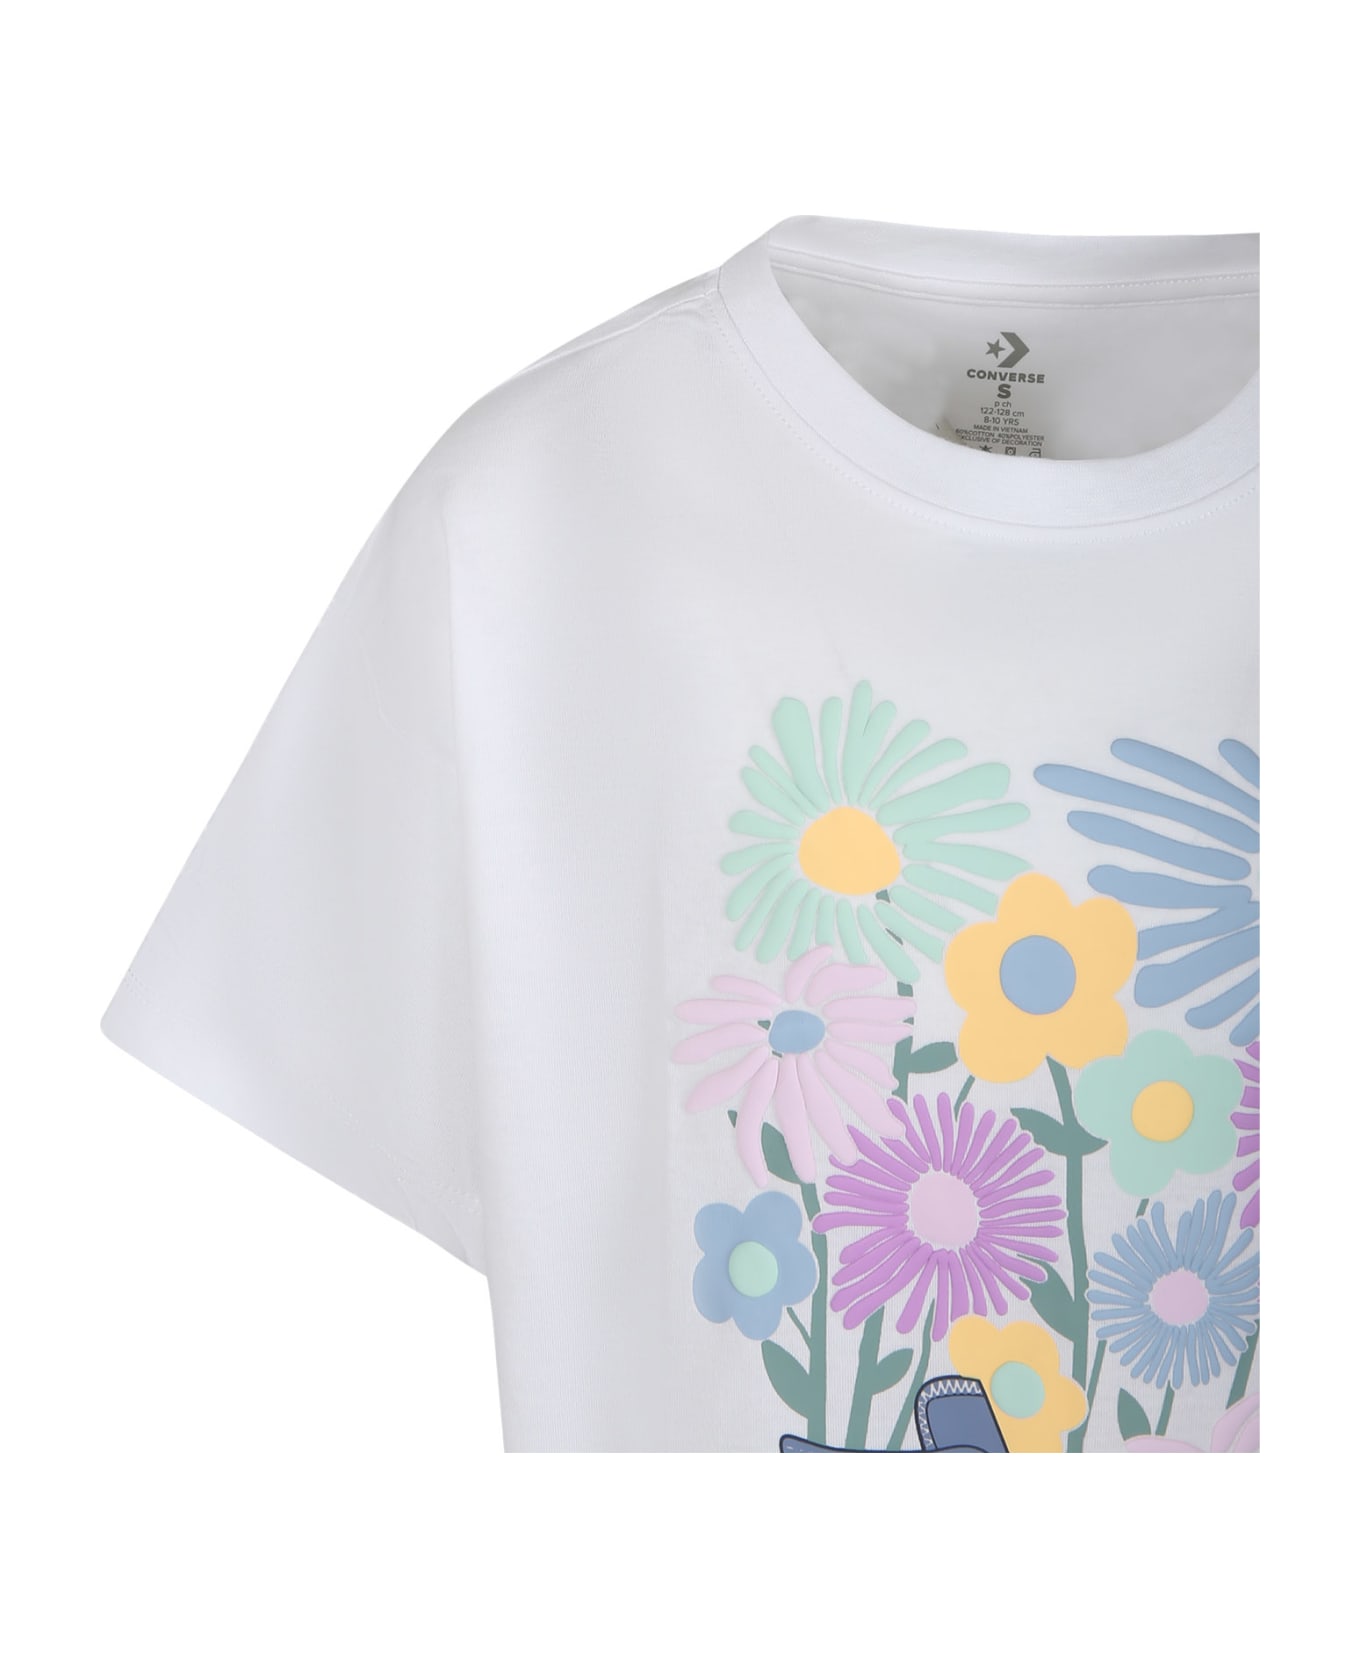 Converse White T-shirt For Girl With Flowers And Shoes Print - White